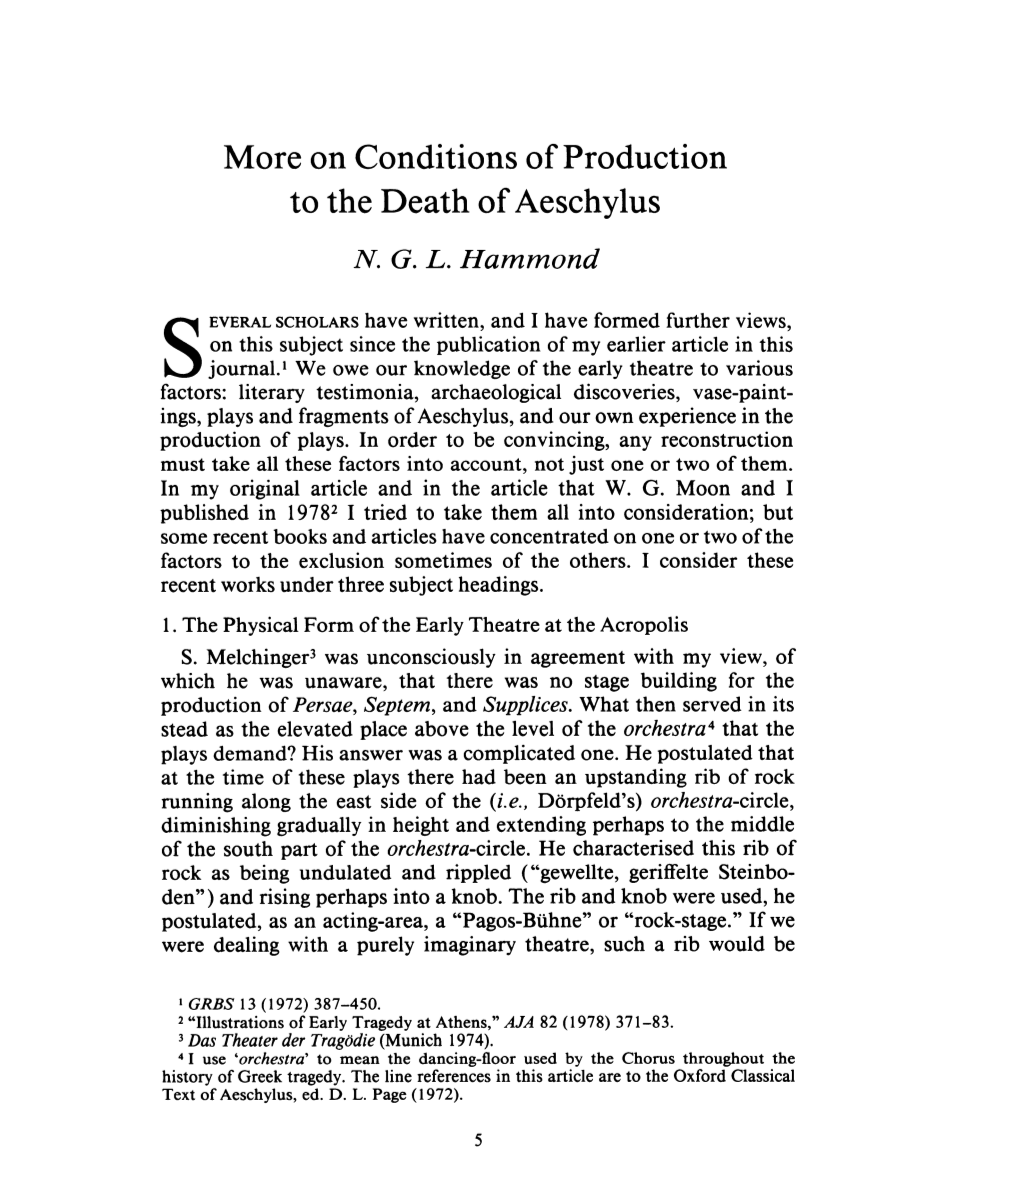 More on Conditions of Production to the Death of Aeschylus , Greek, Roman and Byzantine Studies, 29:1 (1988:Spring) P.5